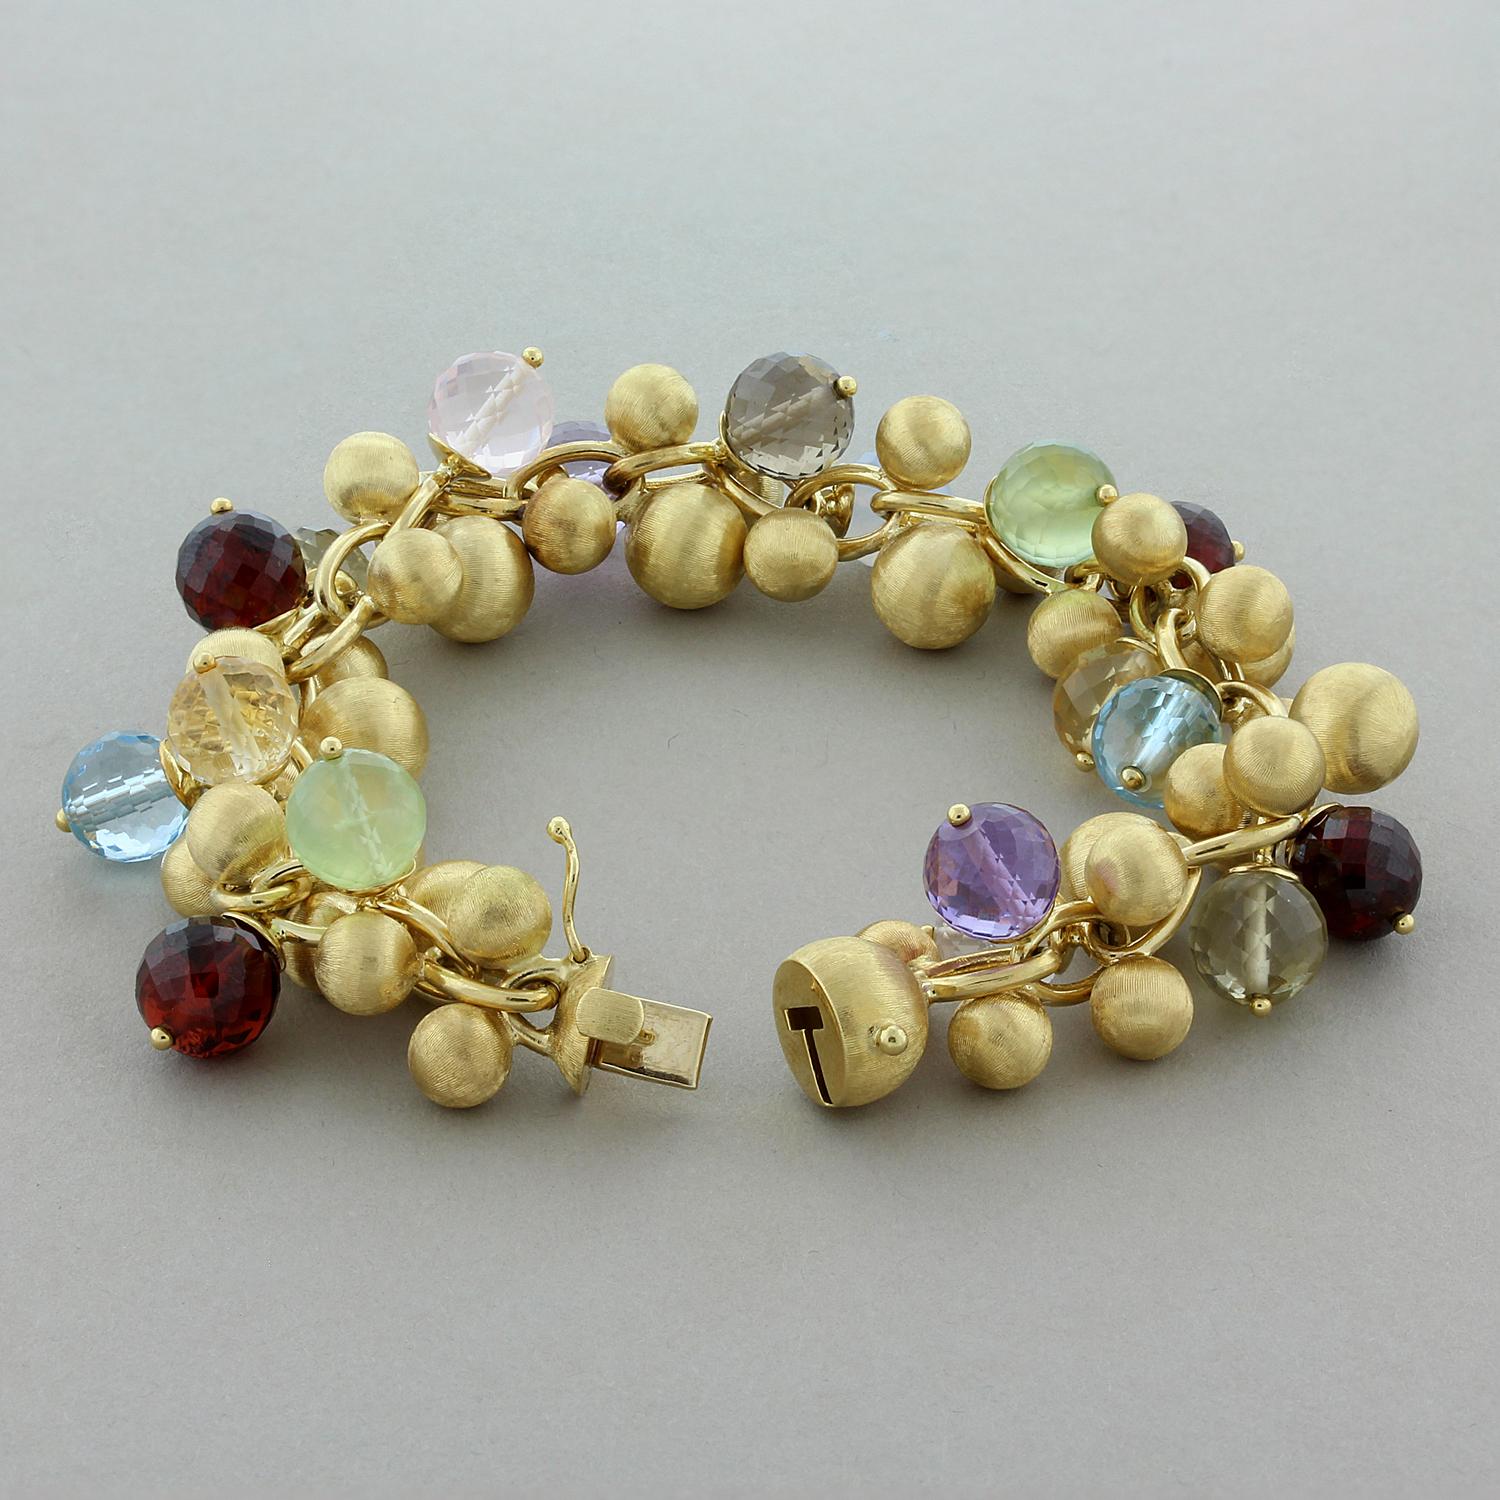 This fun and full of life bracelet featuring beads of multi-color gemstones which include amethyst, garnet, citrine and topaz. They are beaded and faceted to add fire and brilliance to the stones. They are accented by lightweight gold spheres with a